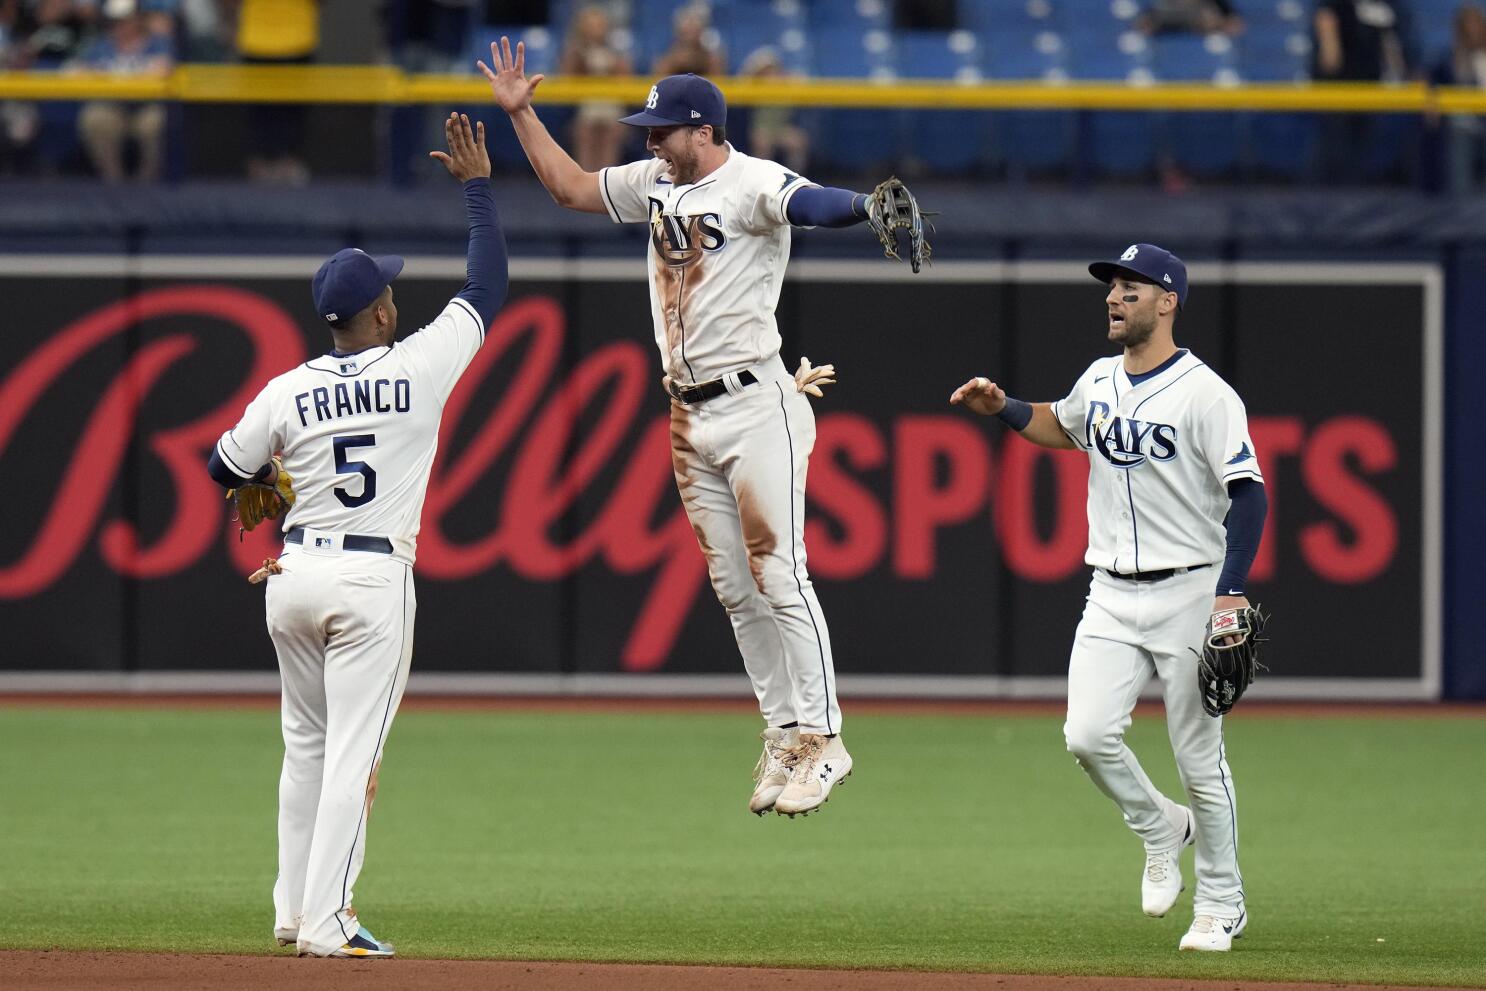 Phillips' infield hit lifts Rays to 2-1 win over Mariners